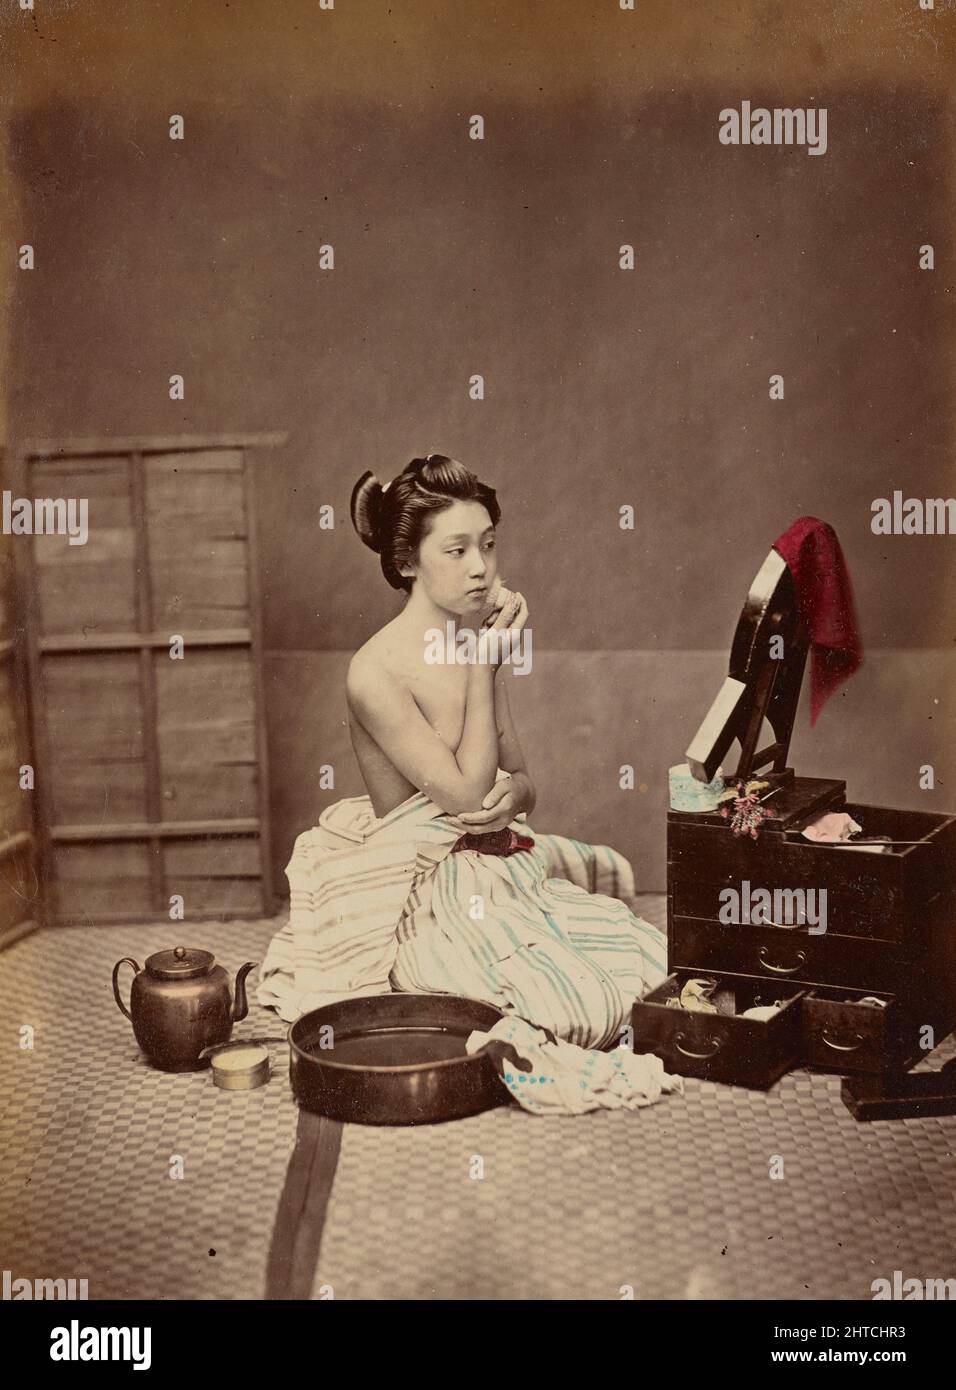 Japanese Toilet, c. 1890. Private Collection. Stock Photo